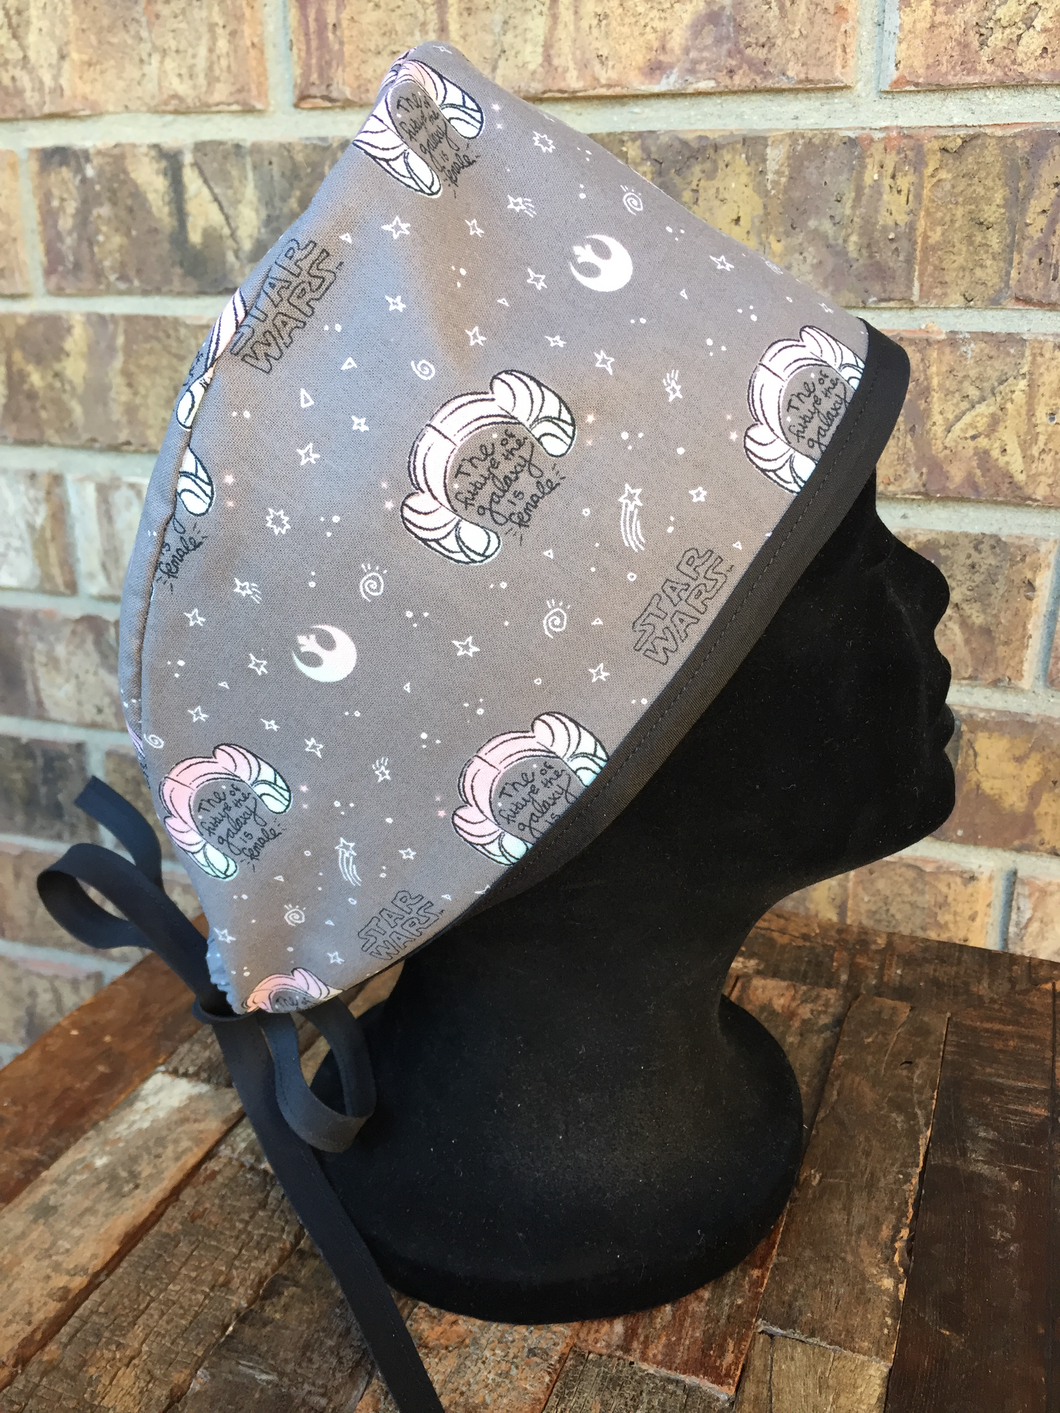 Unisex Scrub Cap - The Future Of The Galaxy Is Female Scrub Cap - Surgical Cap - Gray And Pink